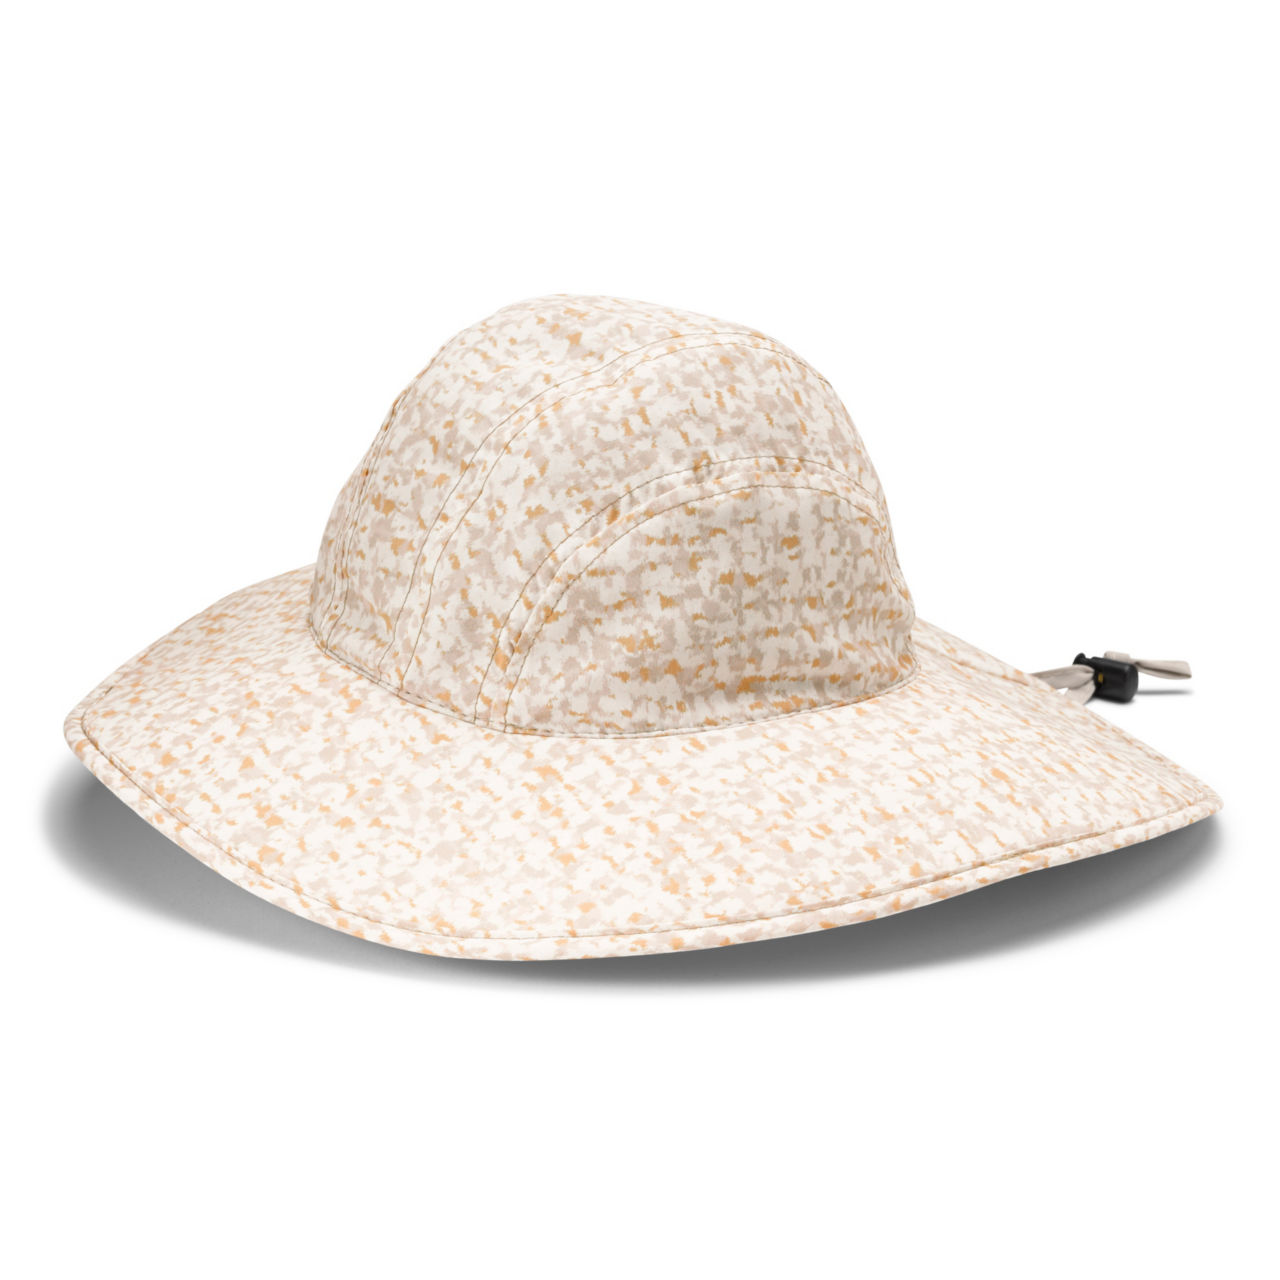 Women’s Printed Performance Sun Hat -  image number 0